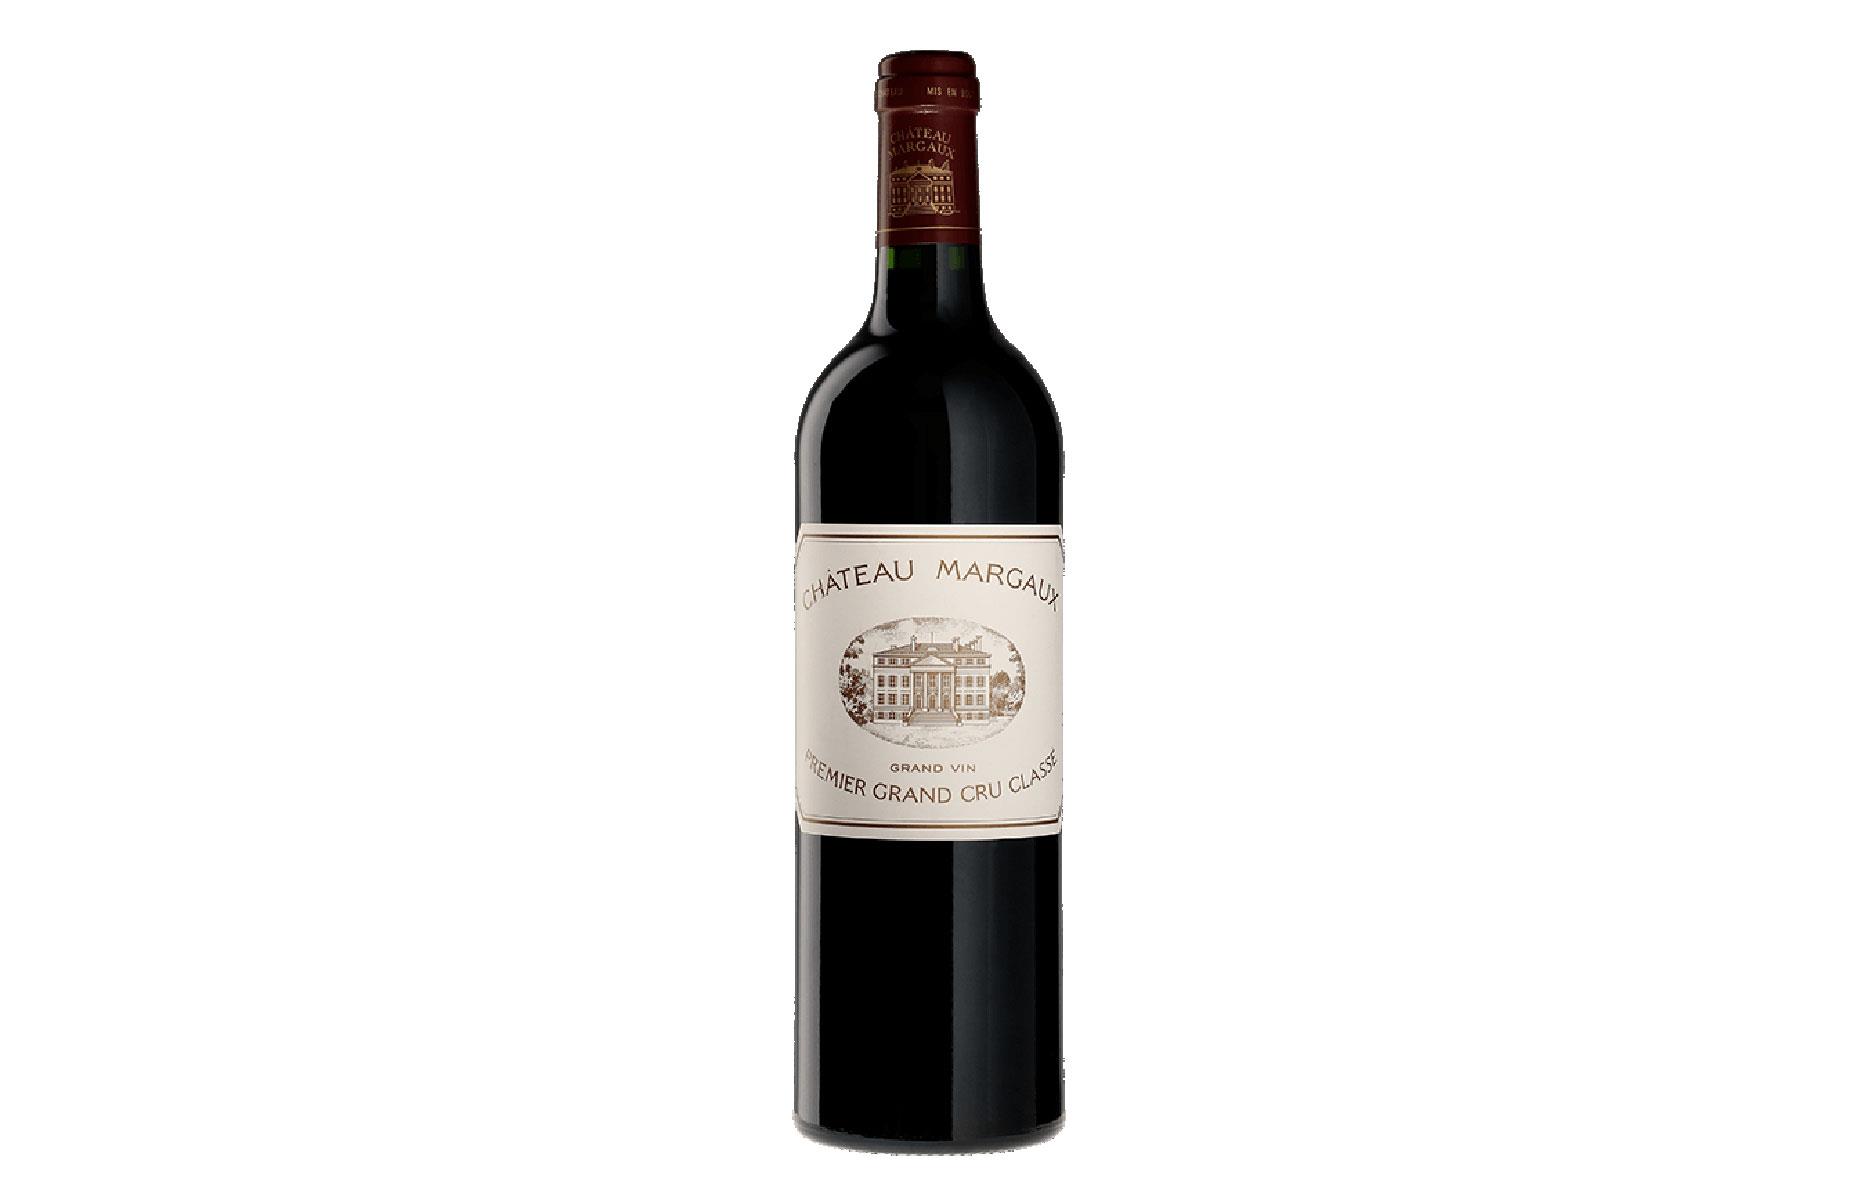 Château Margaux 1995 red wine: $650 (£500)